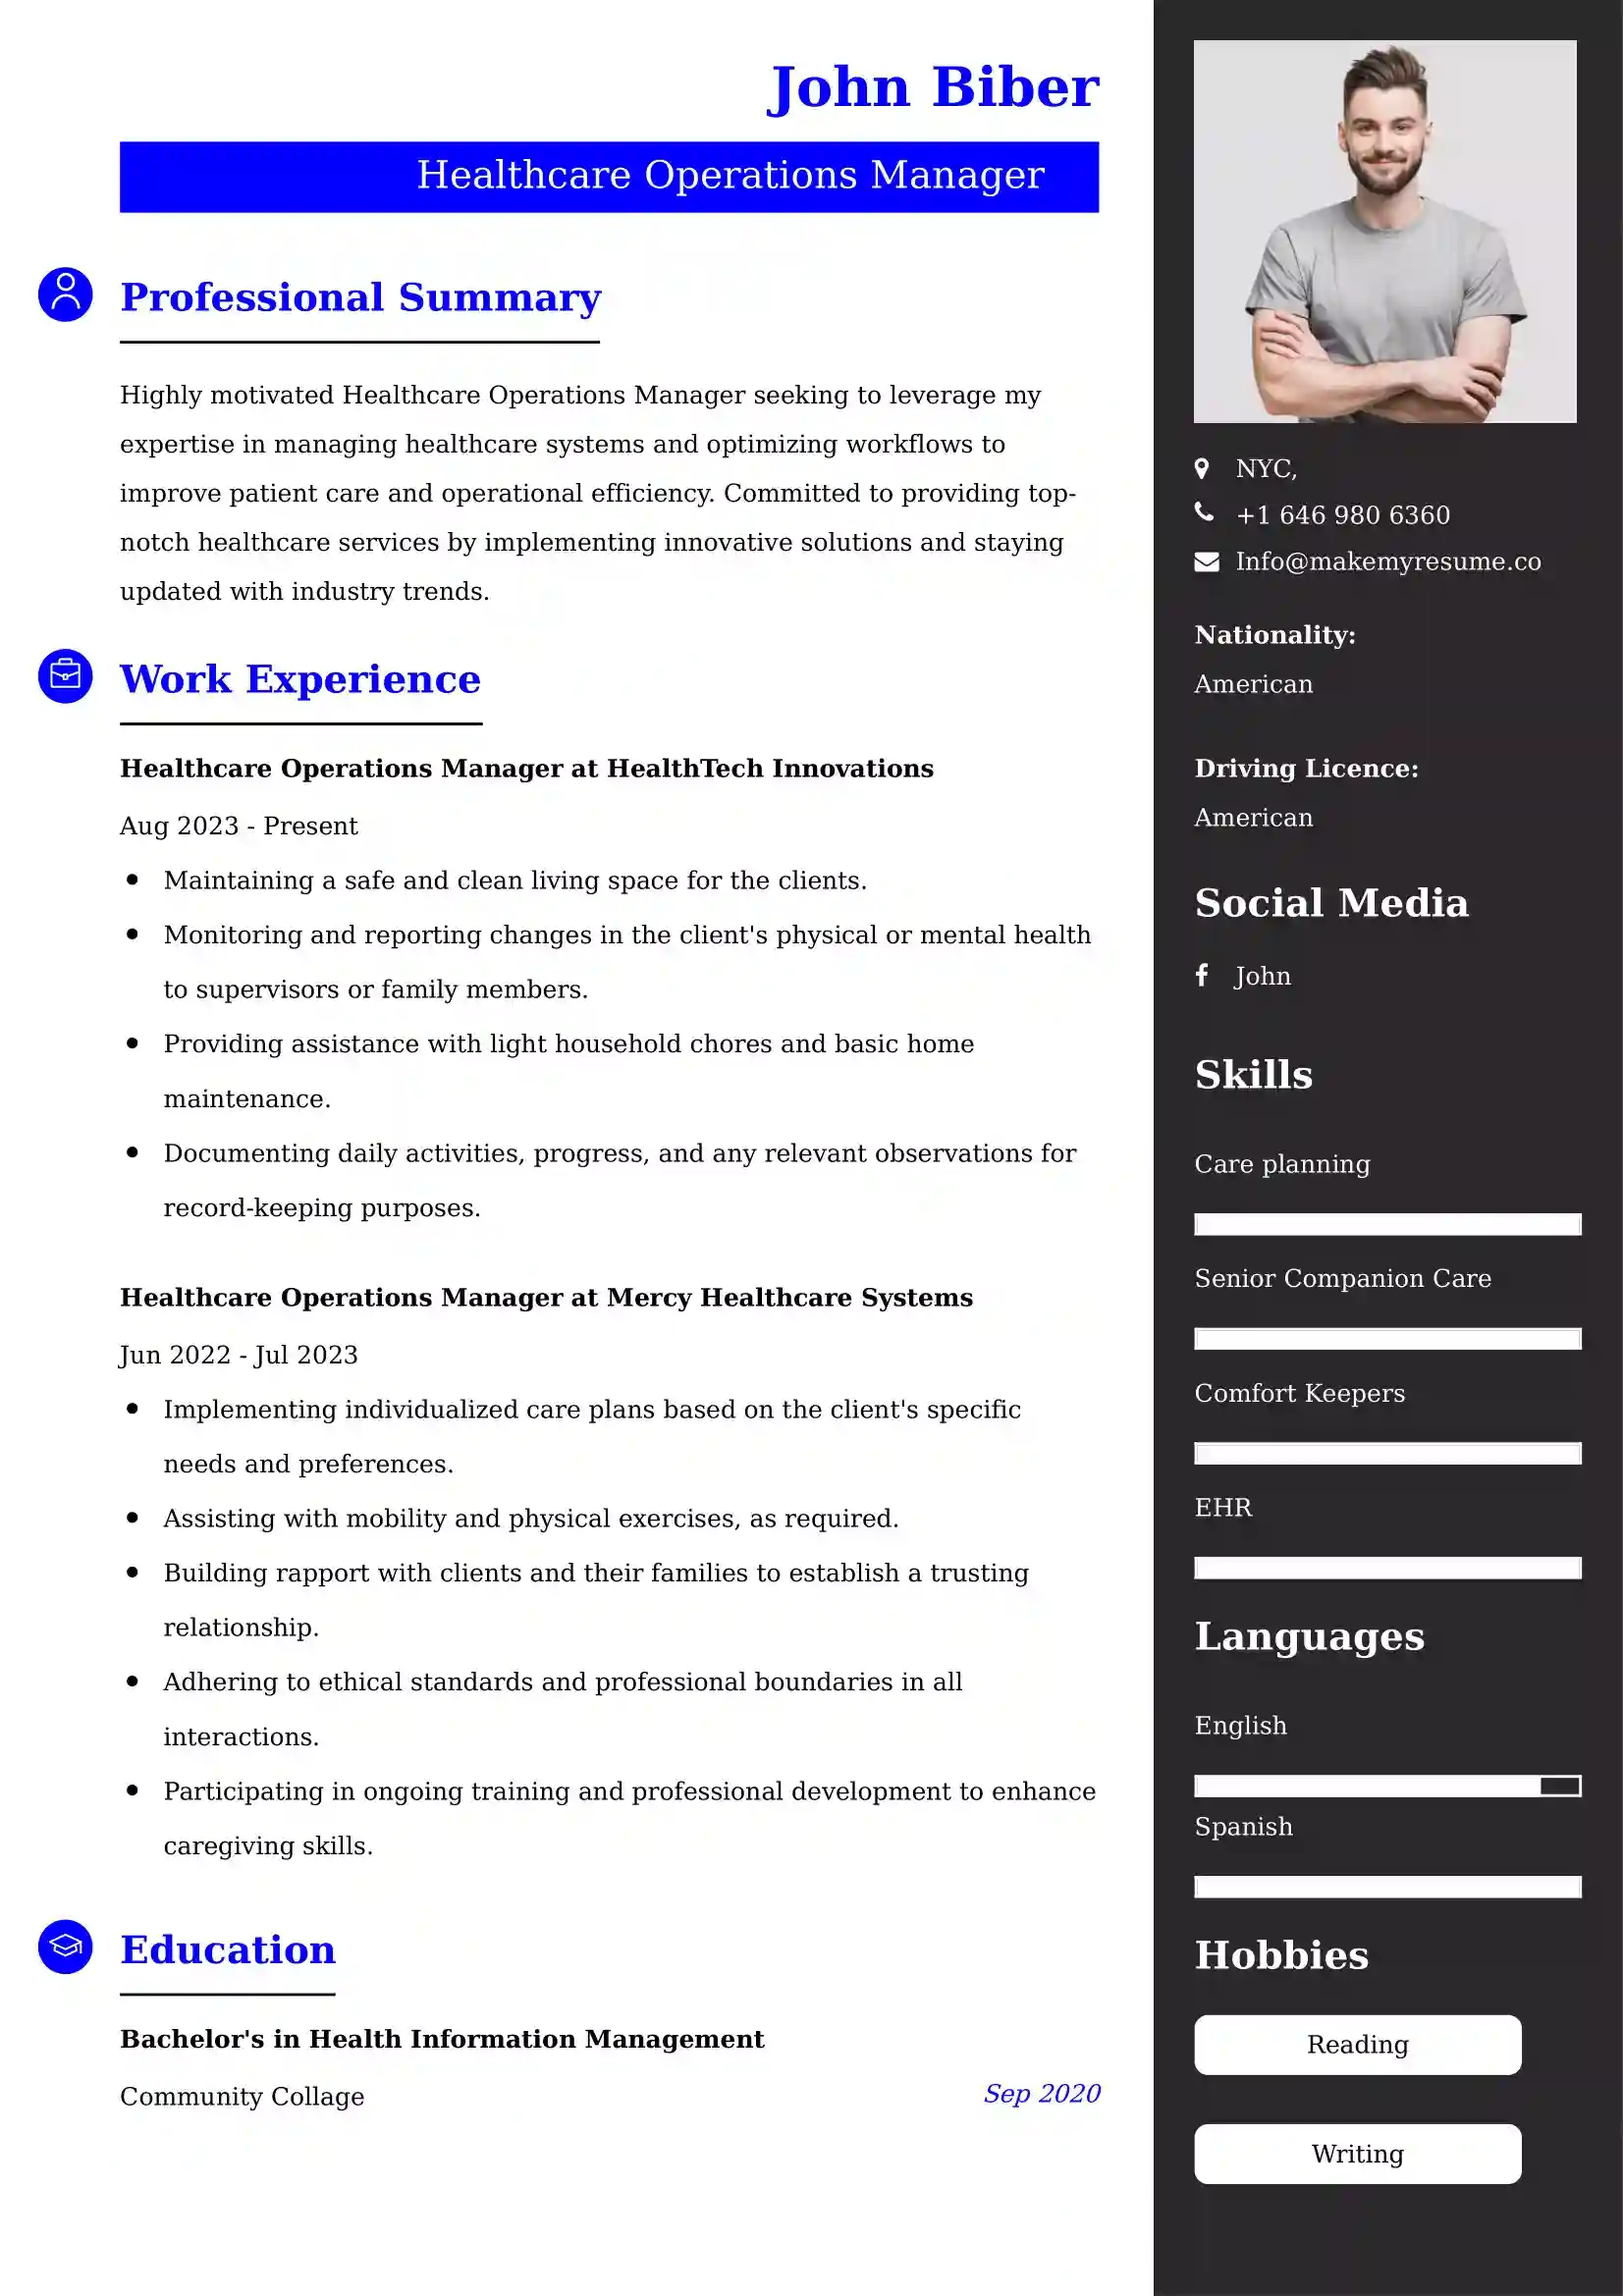 Healthcare Operations Manager Resume Examples - Brazilian Format, Latest Template